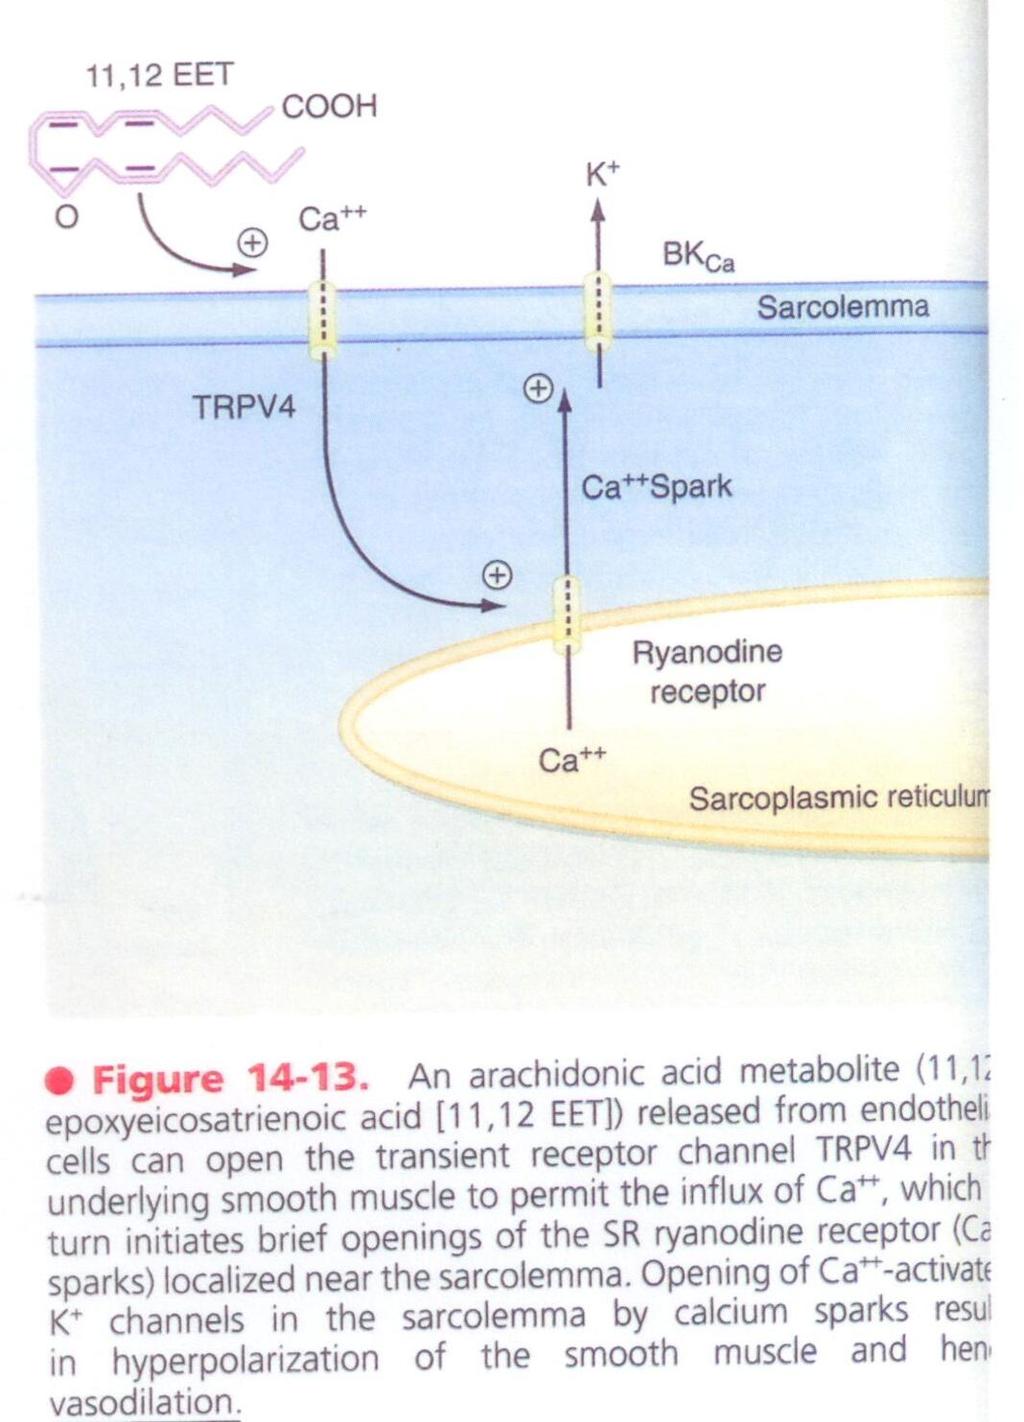 BIPN 100 F15 (Kristan) Human Physiology Lecture 10. Smooth muscle p. 5 a. Ligand-gated receptors (e.g., hormone receptors) can change [Ca ++ ]in without affecting Vm ; the Ca ++ changes the force of contraction.